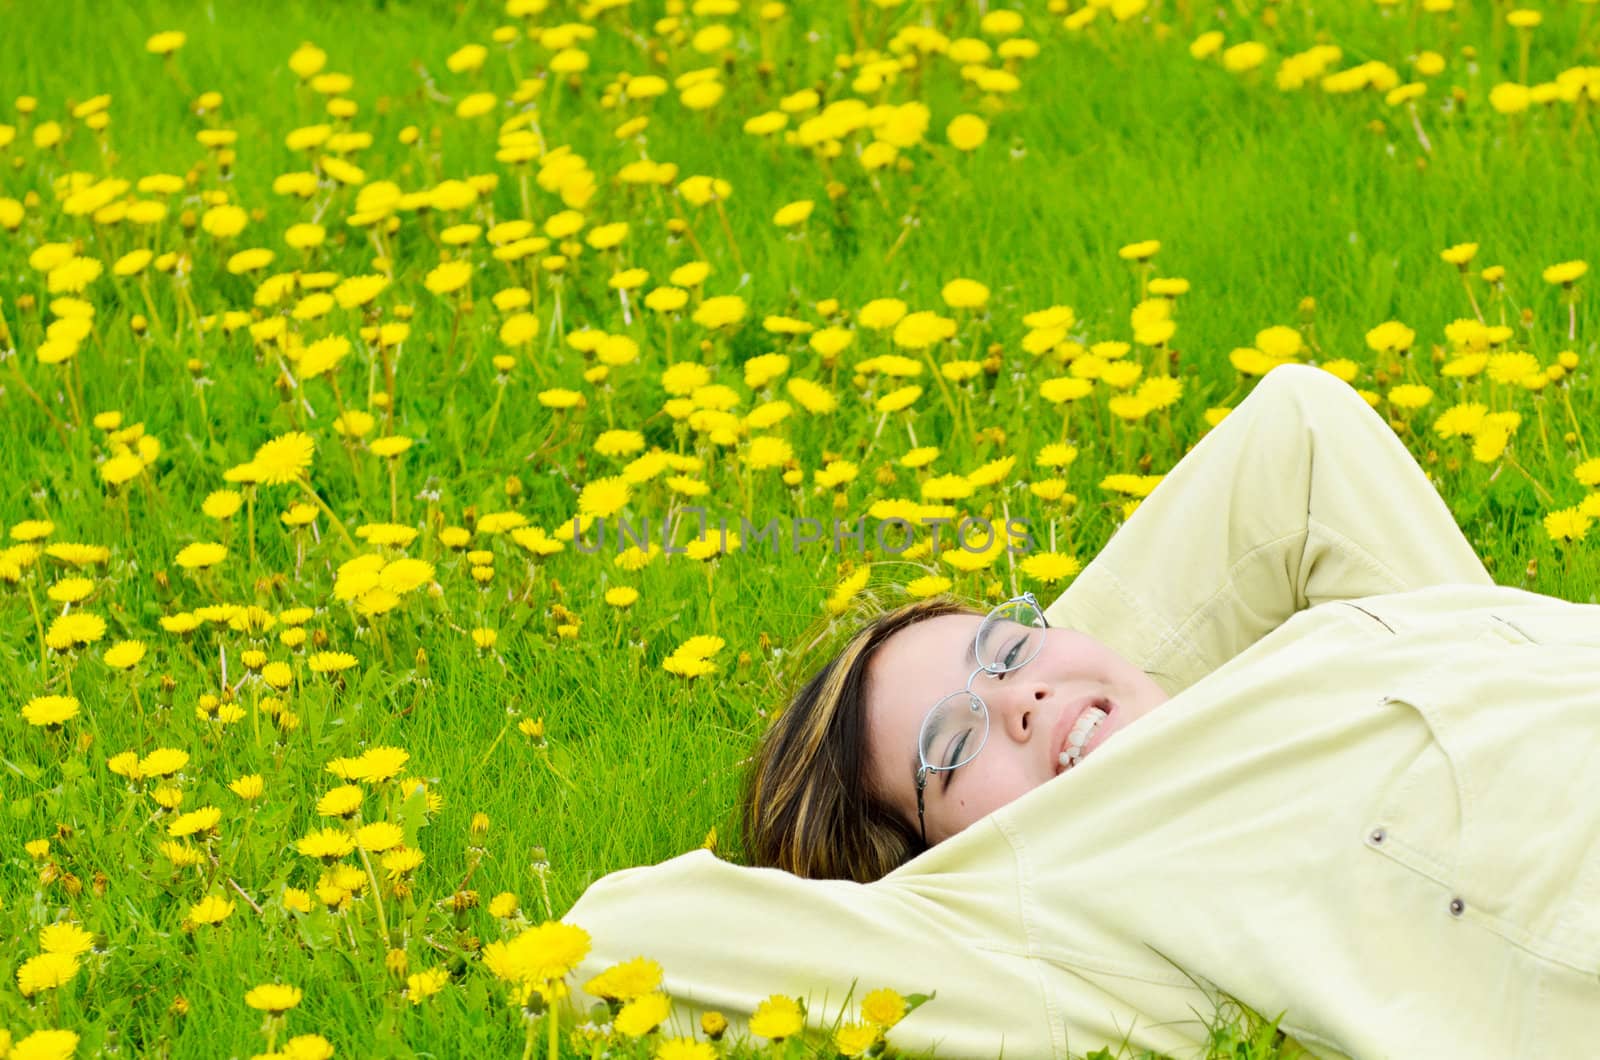 A young preteen girl is lying in the grass, relaxing in the sun.